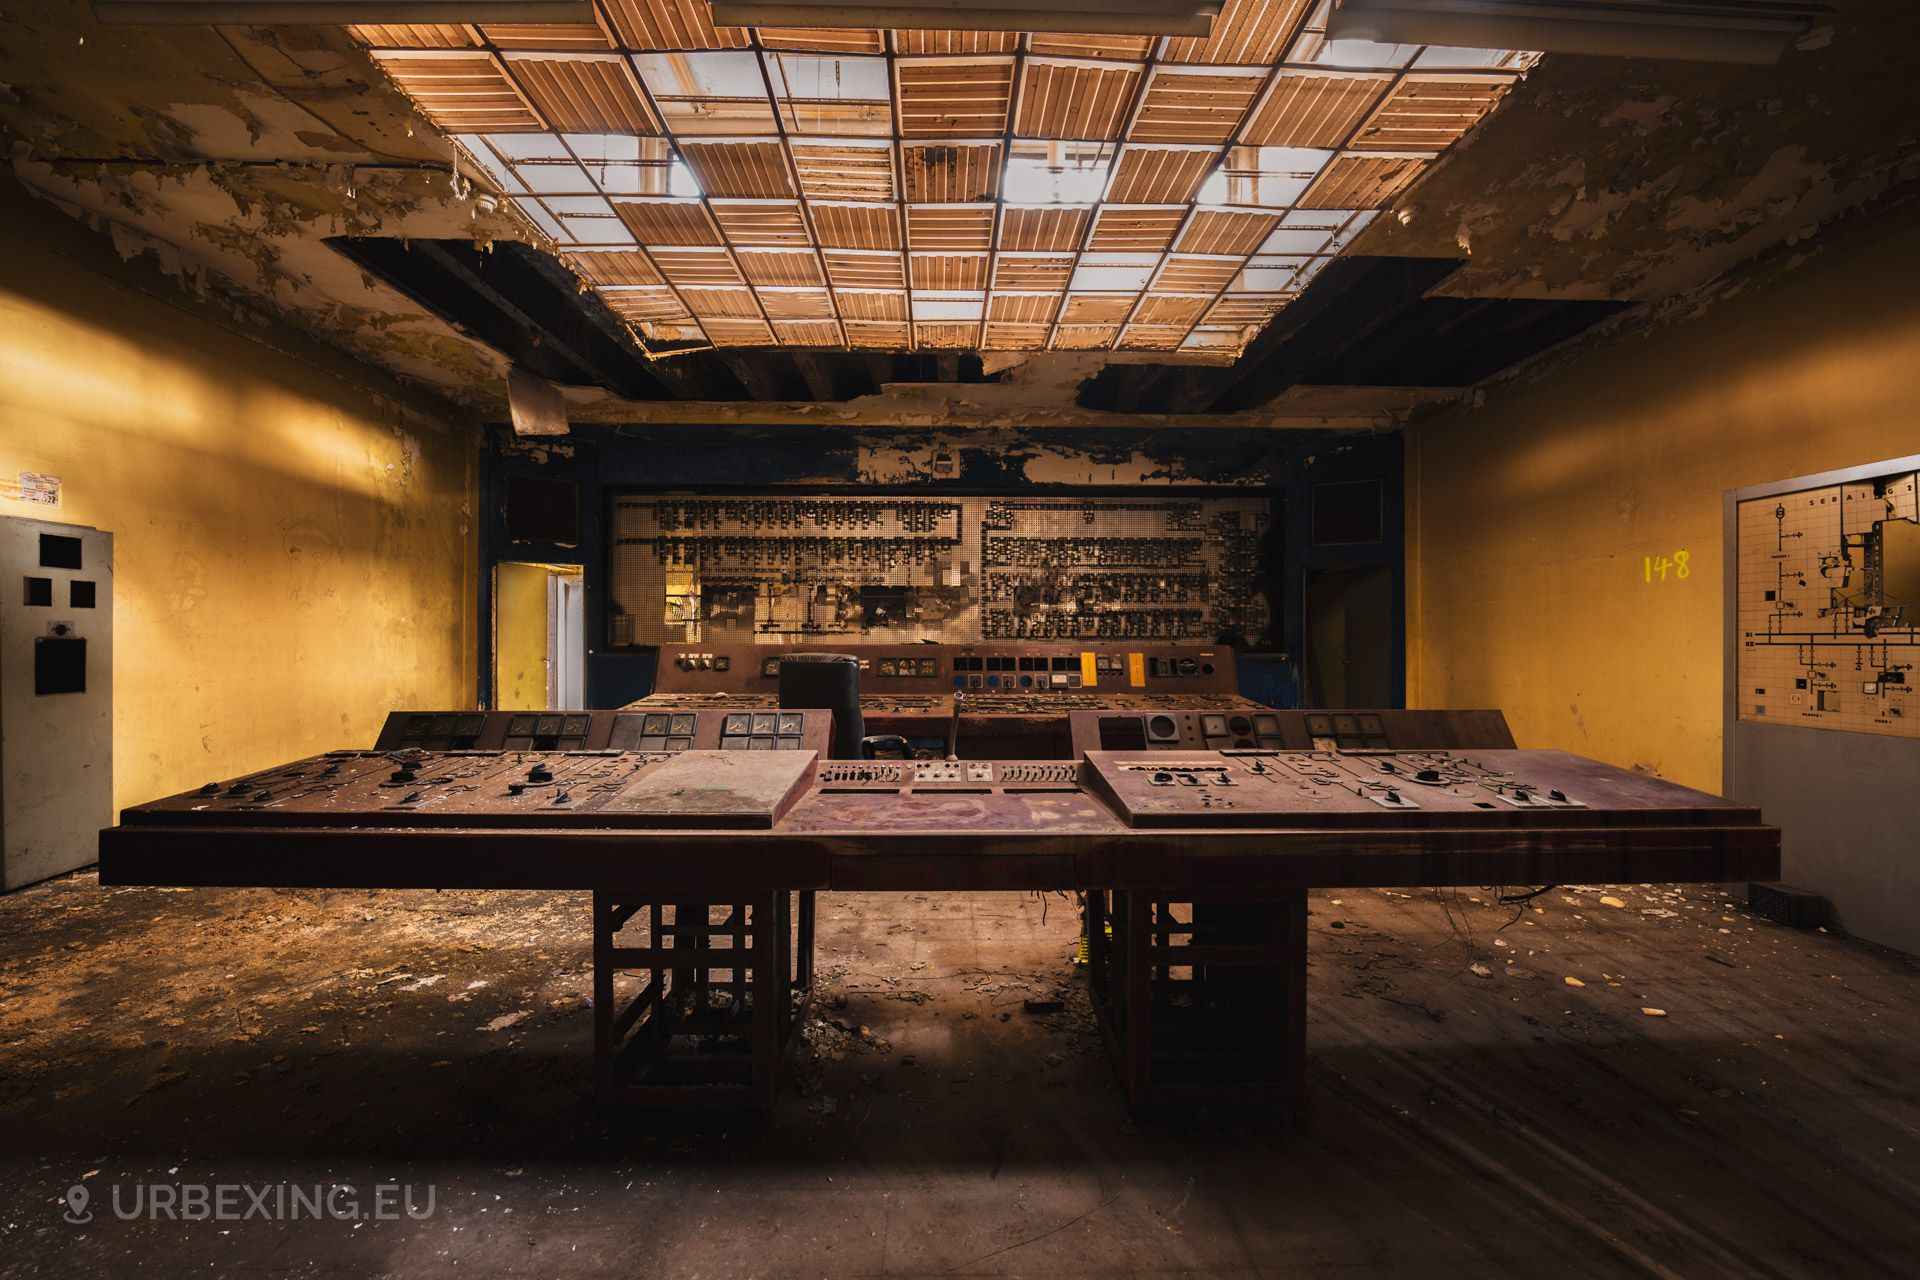 a photograph taken inside of a former steel producing factory owned by the Akers company. the photo shows many gauges and buttons.